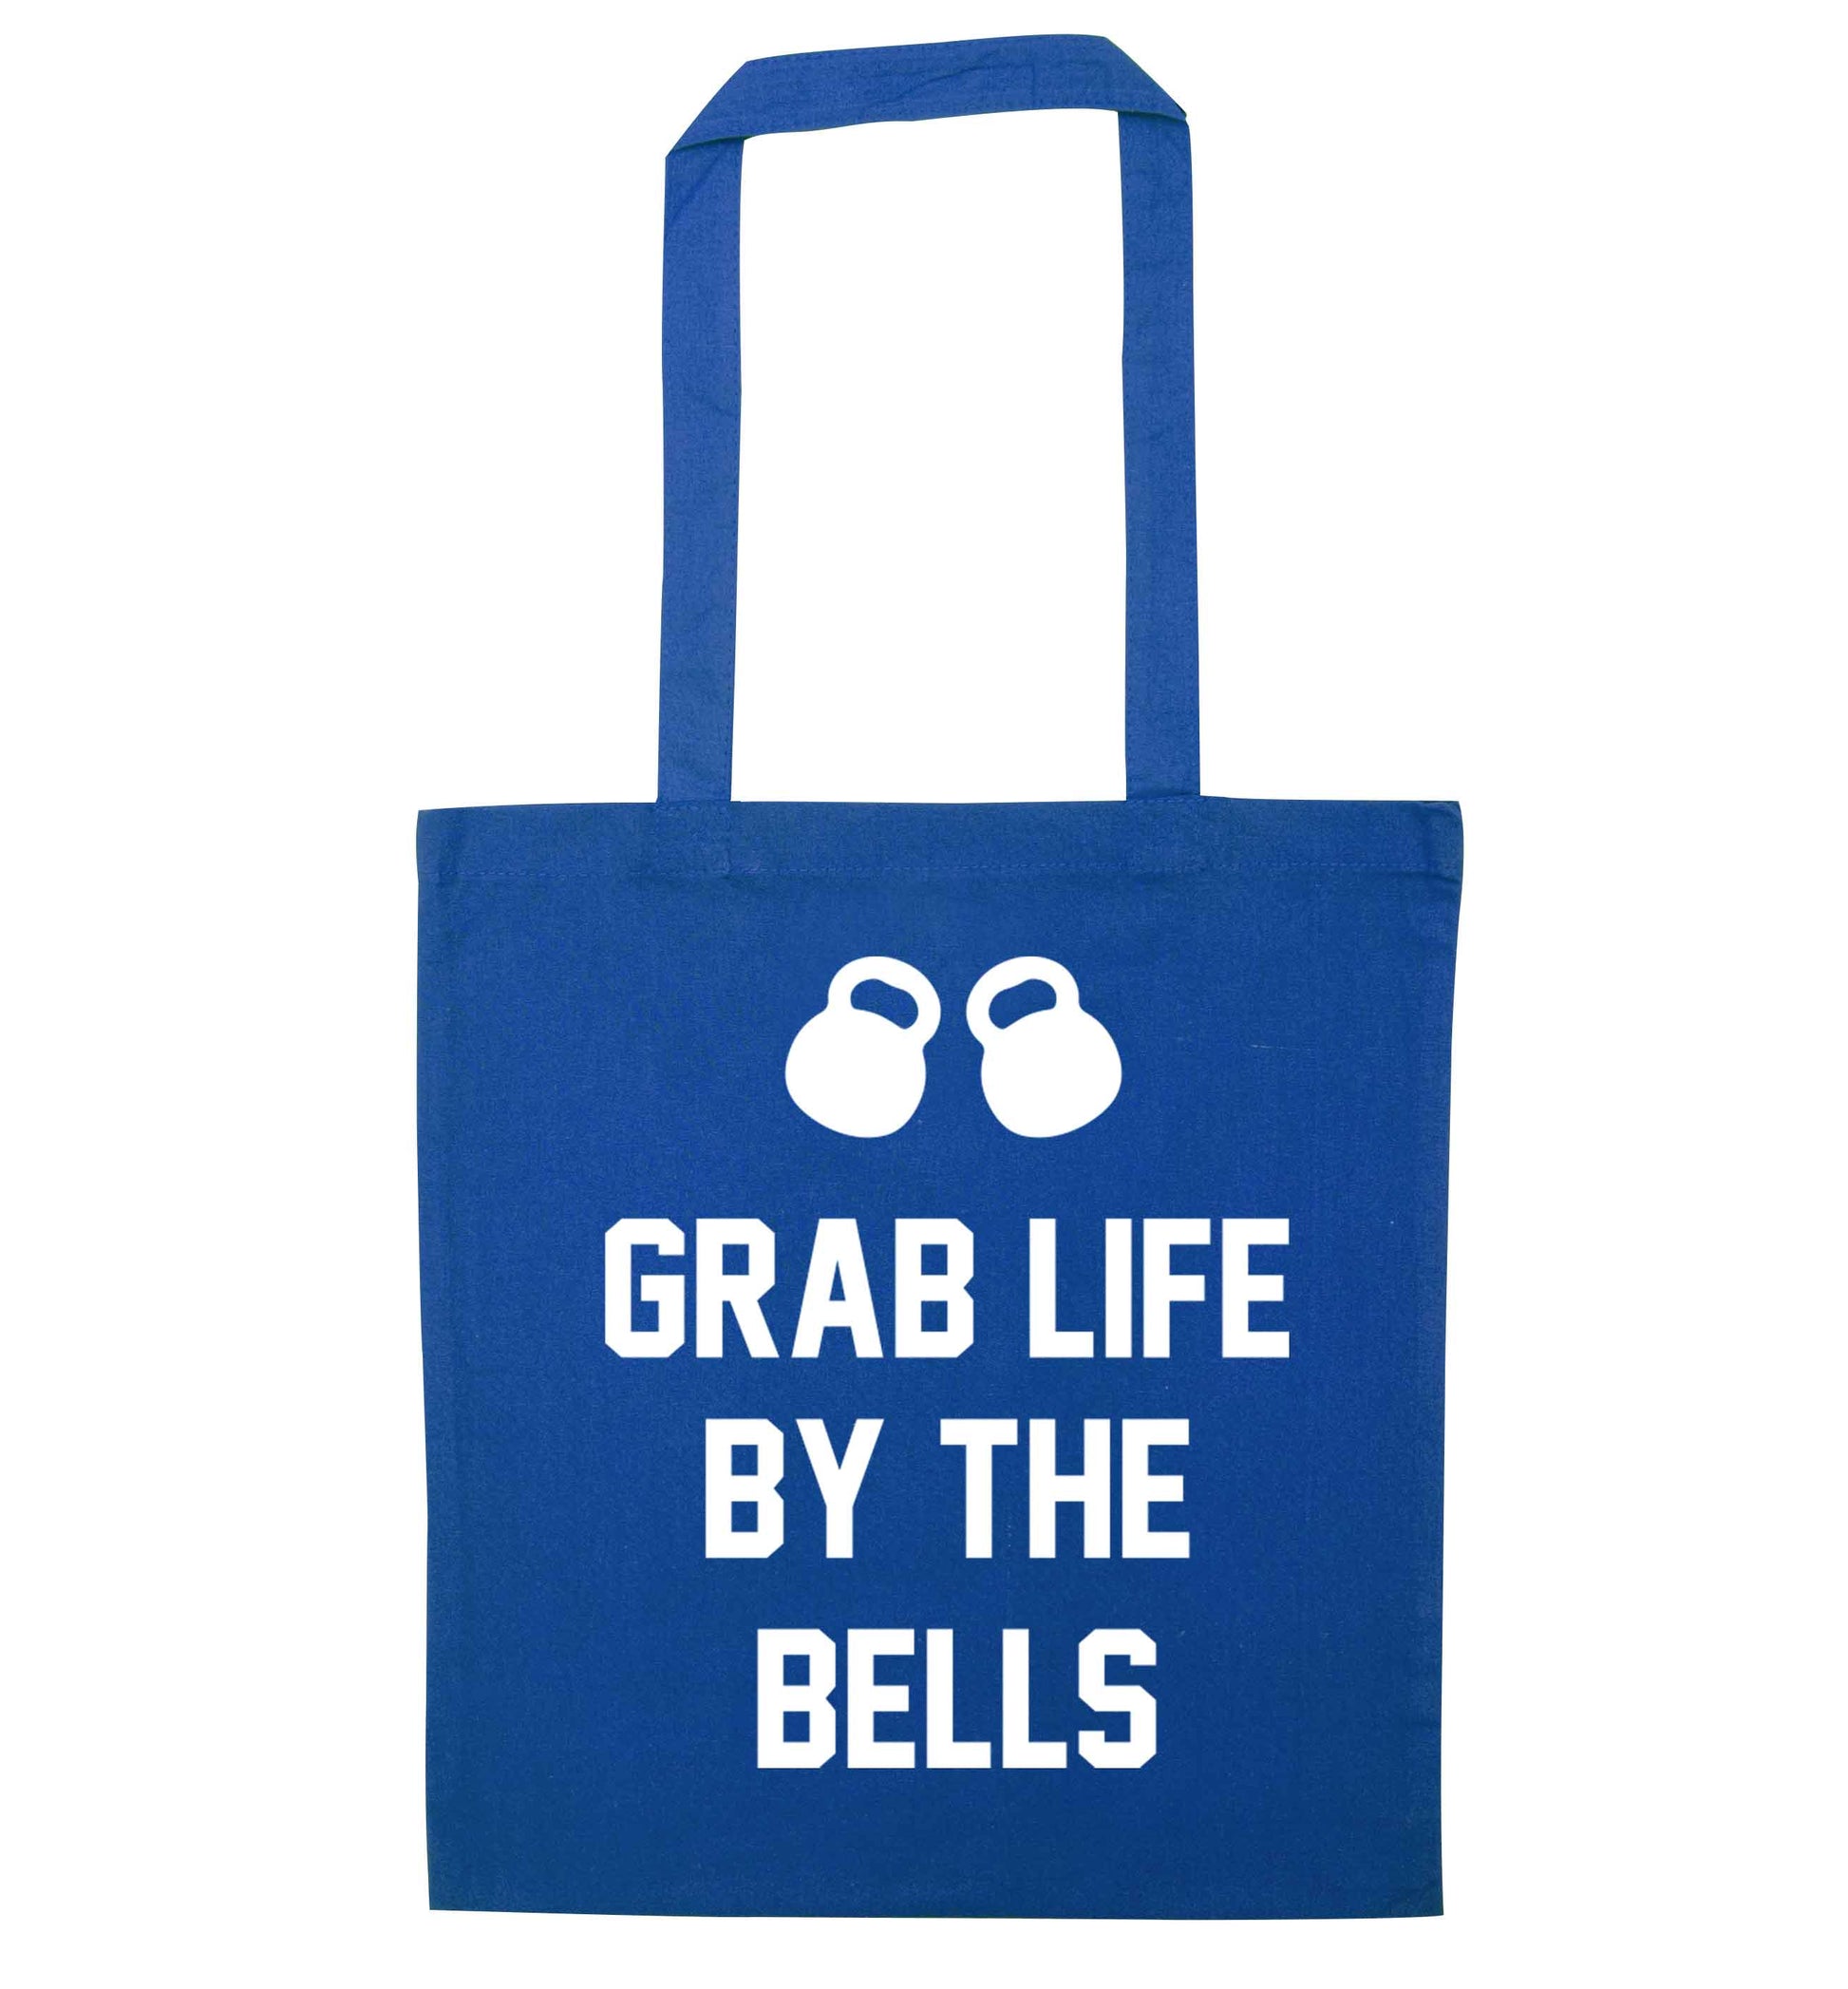 Grab life by the bells blue tote bag